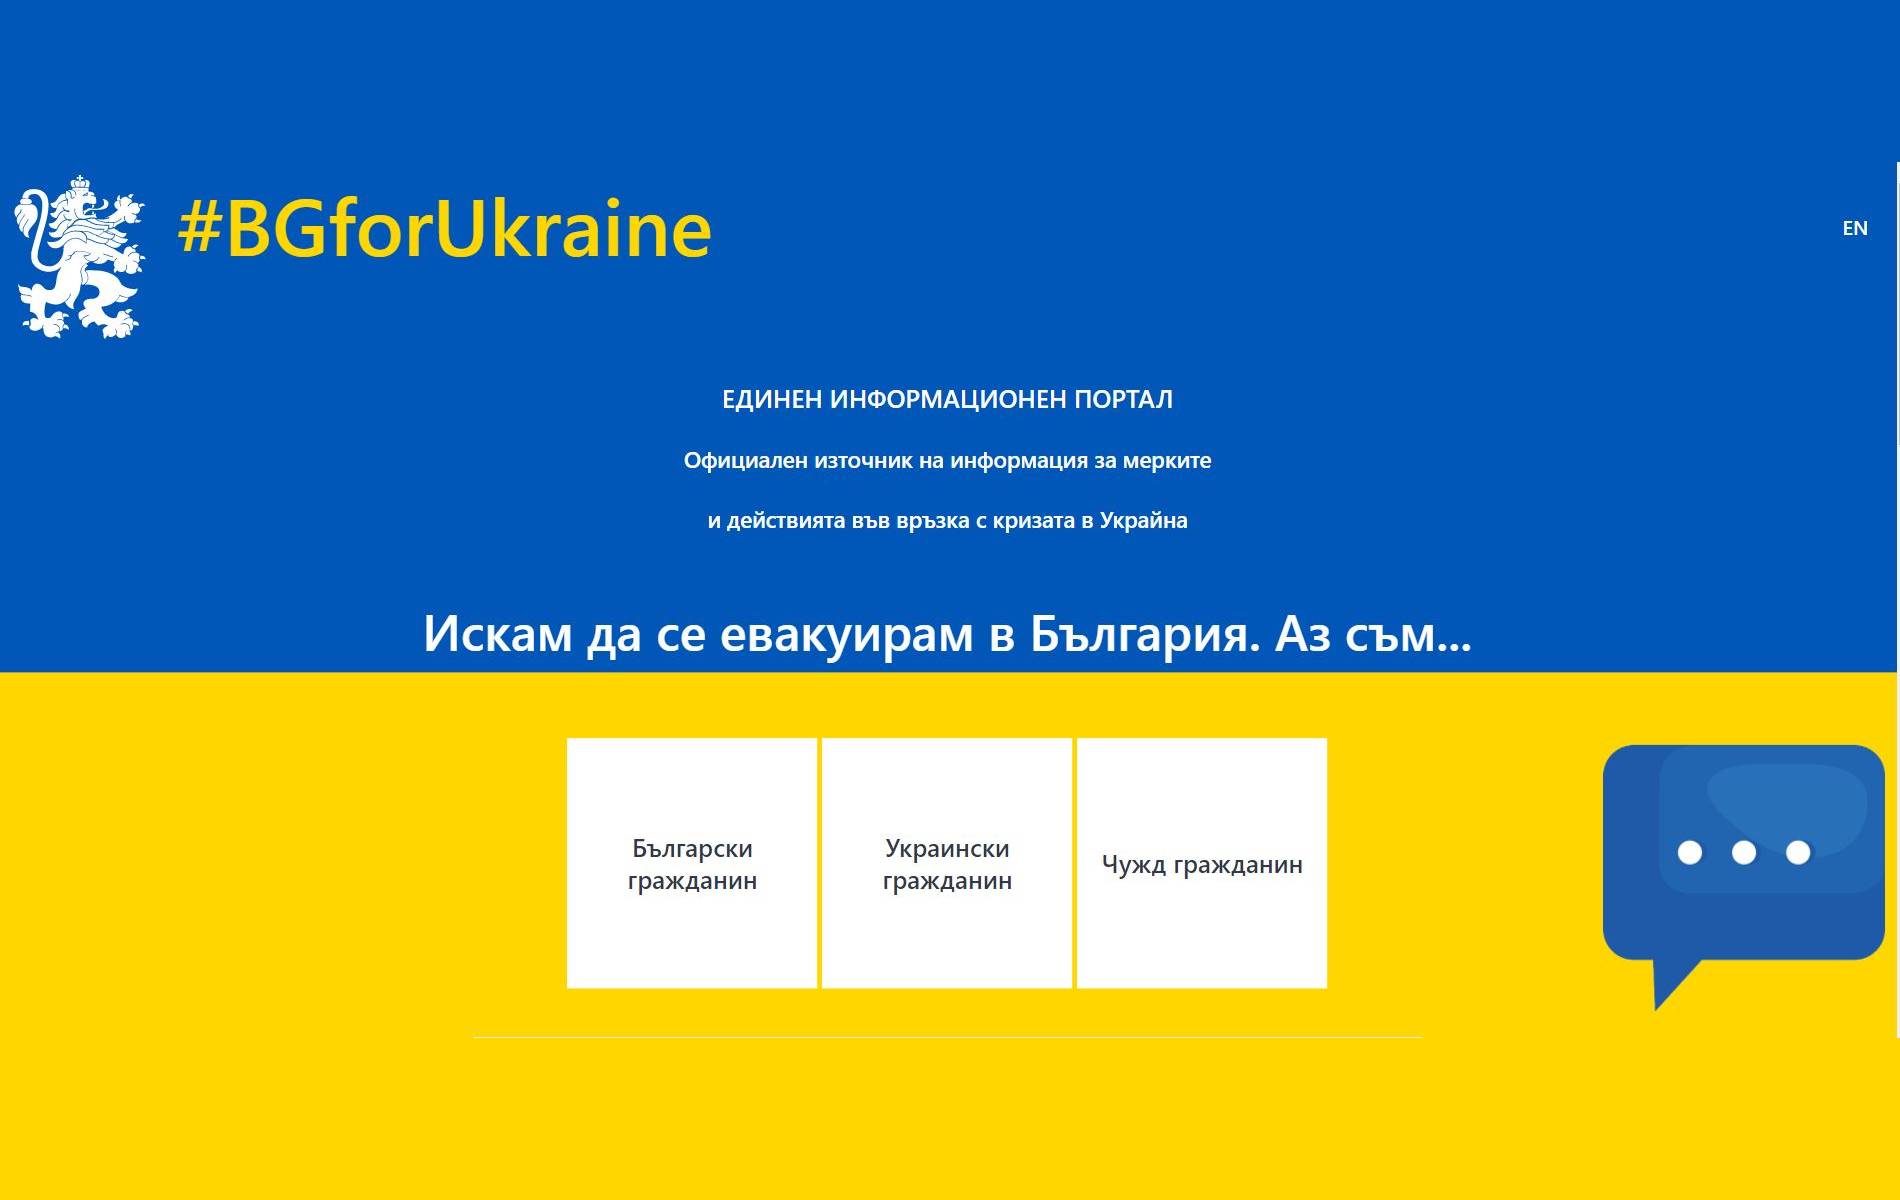 Government opened a unified information portal to help people leaving Ukraine